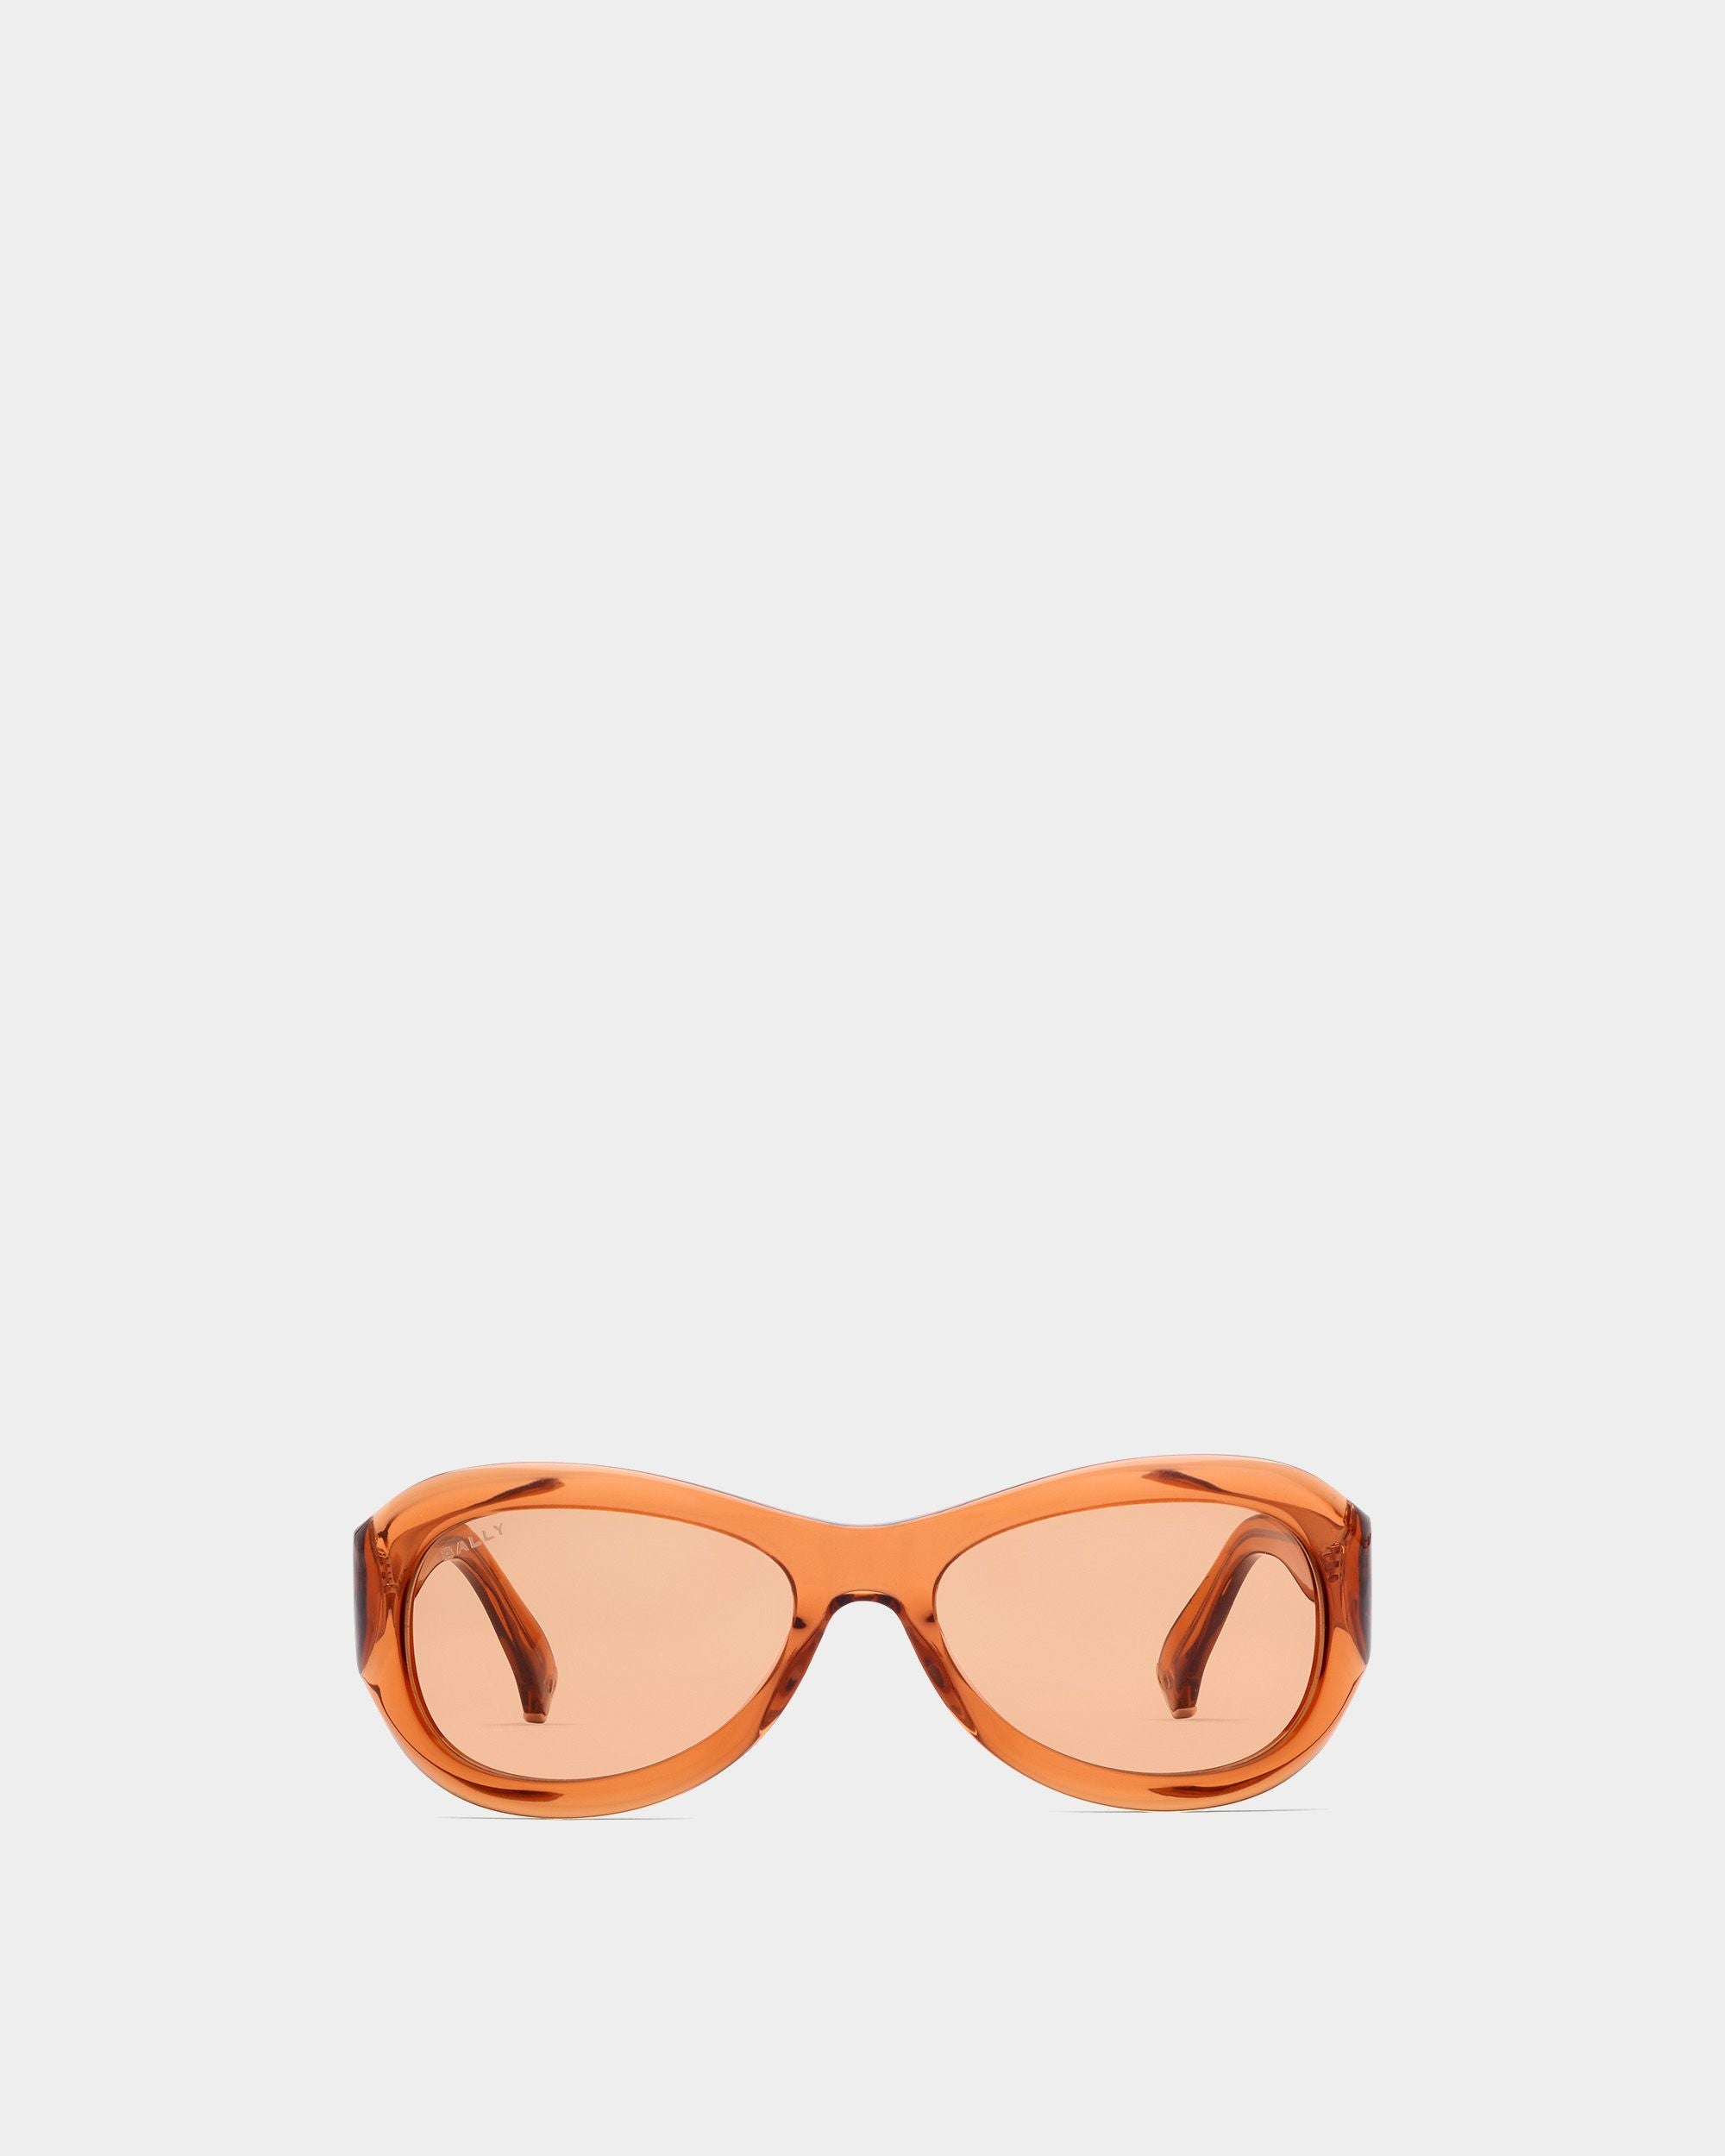 Maurice Sunglasses | Unisex Accessories | Amber Acetate with Orange Lenses | Bally | Still Life Front